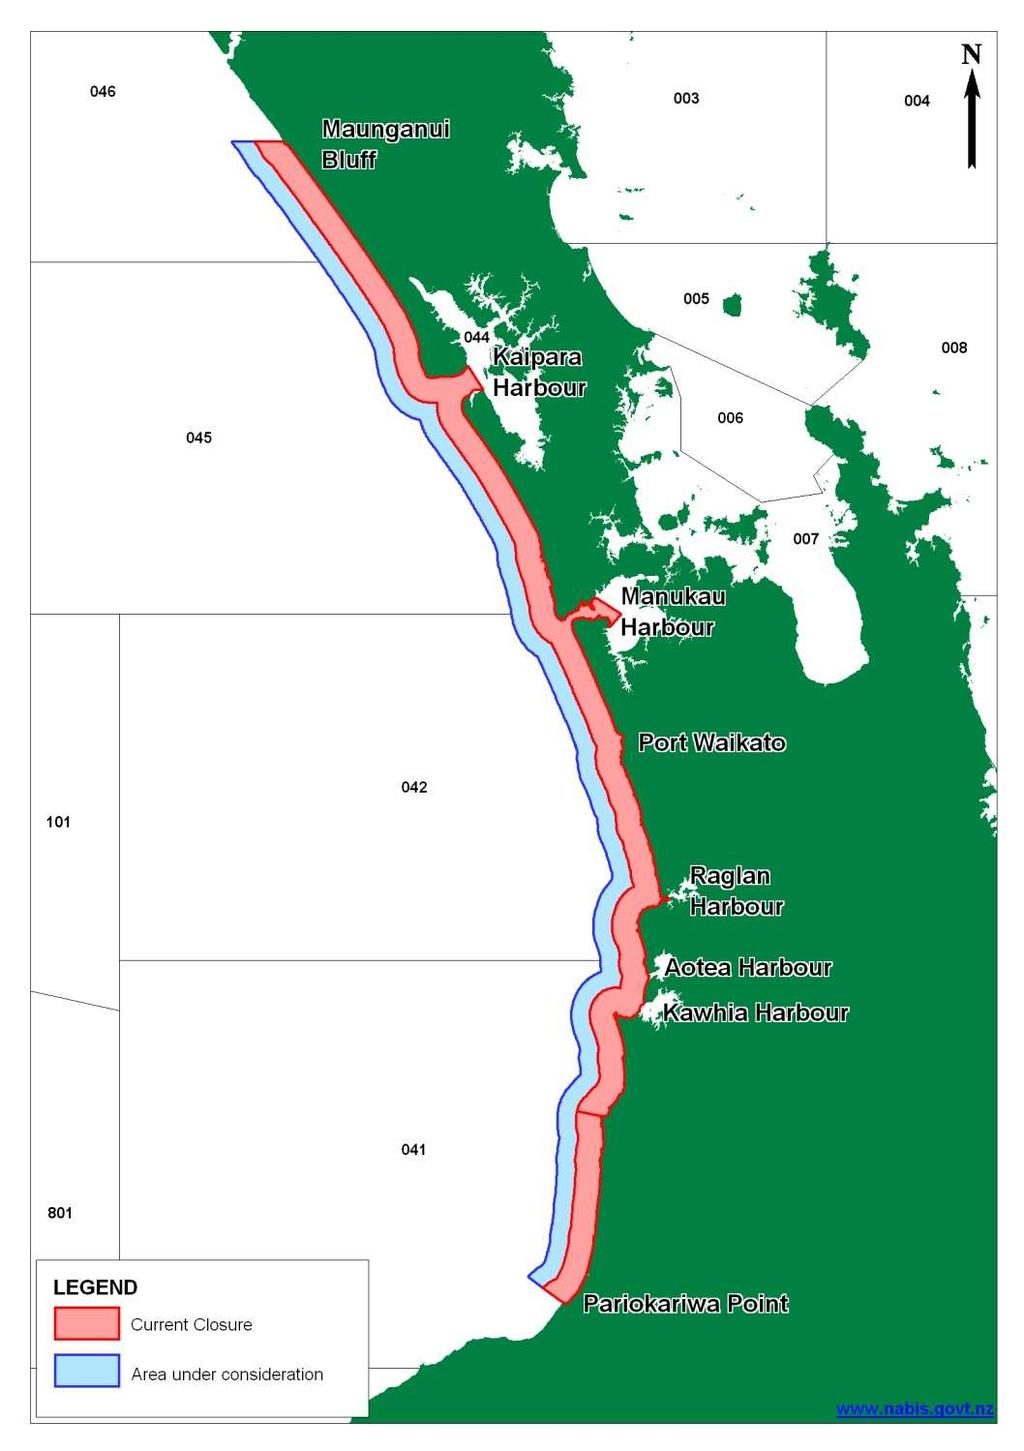 Maui s dolphins: West Coast of the North Island beyond 4 nm offshore 30 This section outlines information and analysis to support reconsideration of the decision to close the offshore area, 4-7 nm